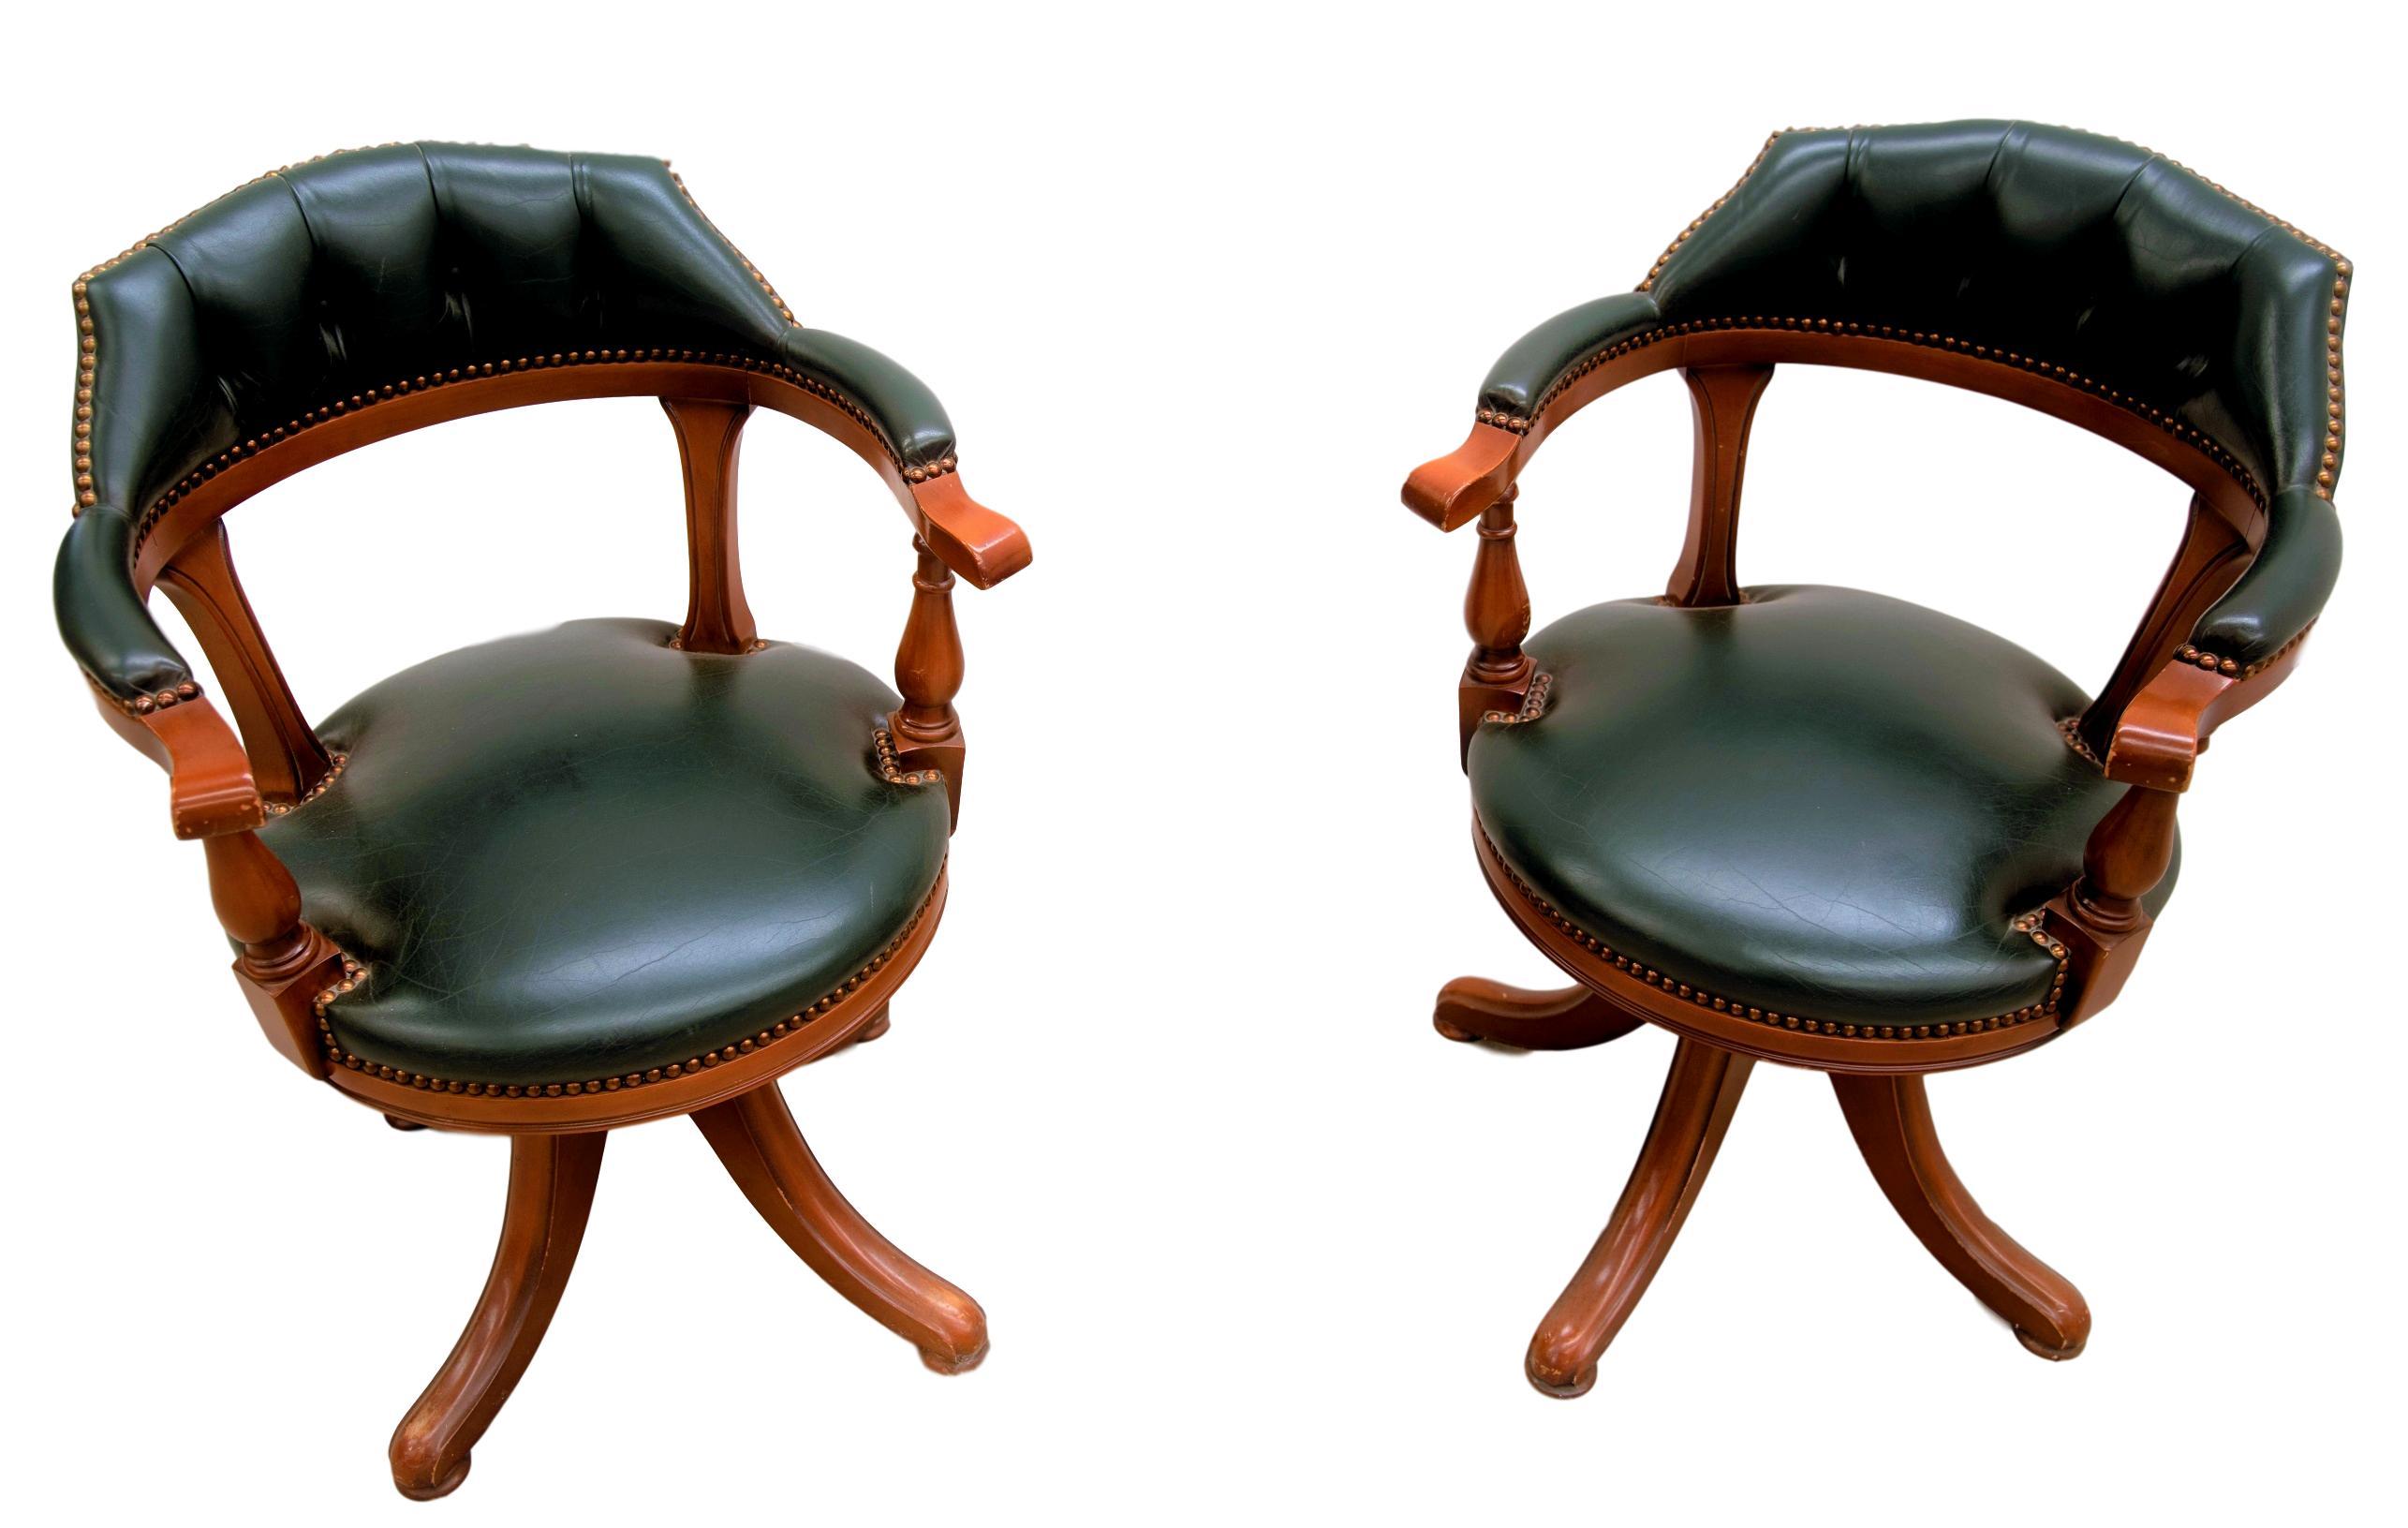 Victorian 1980s Green Leather & Wood Open Arm Captain Chair, Tufted and Nail Finish, Pair